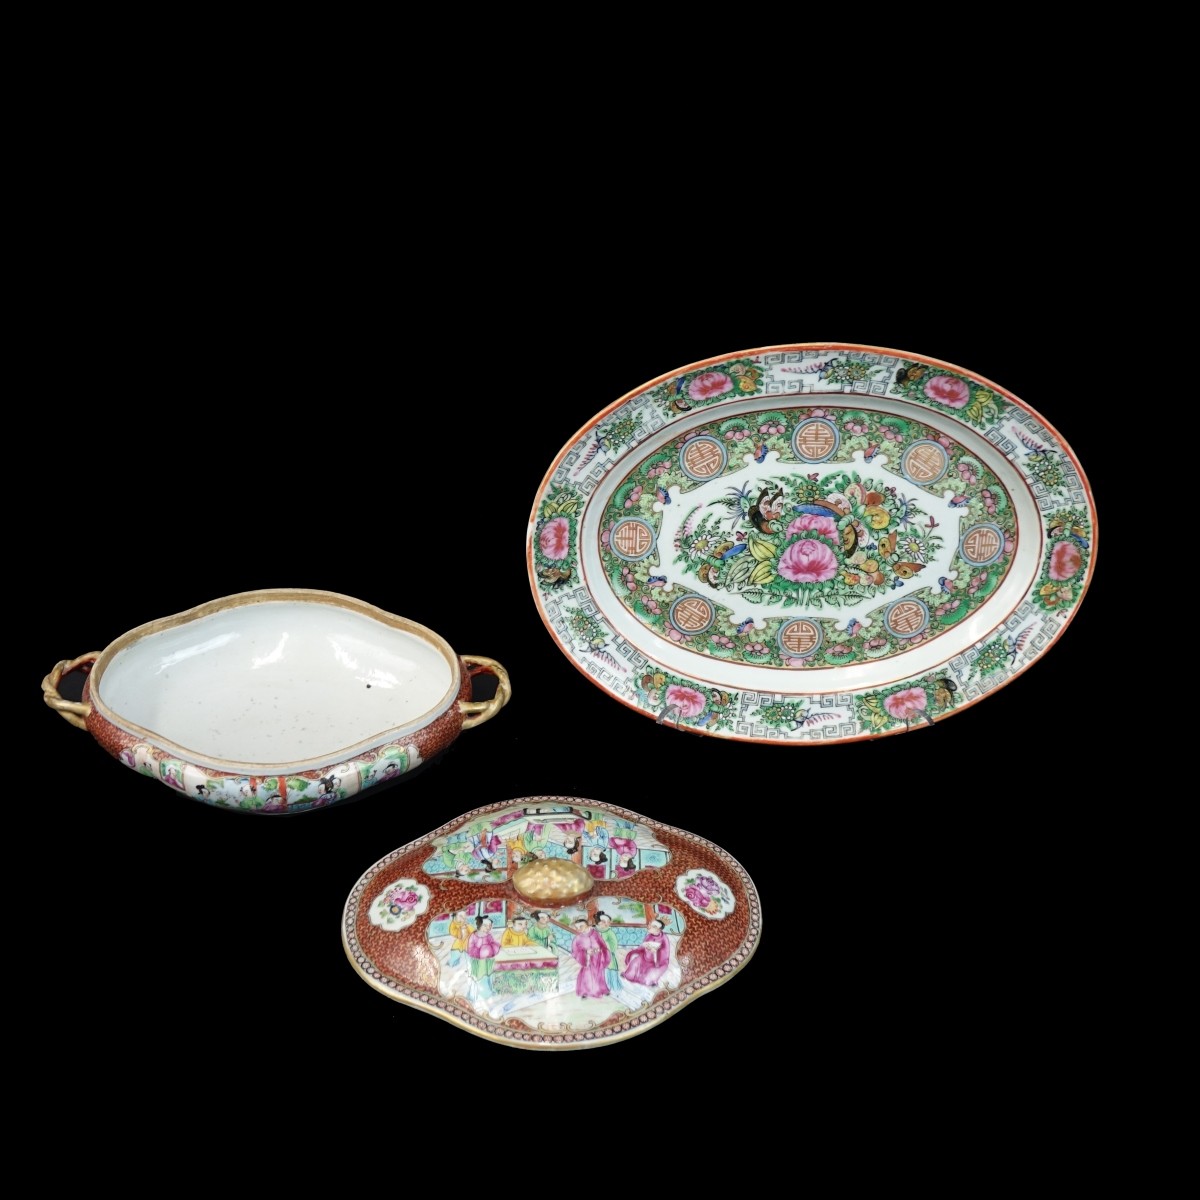 Two (2) Chinese Export Porcelain Tableware